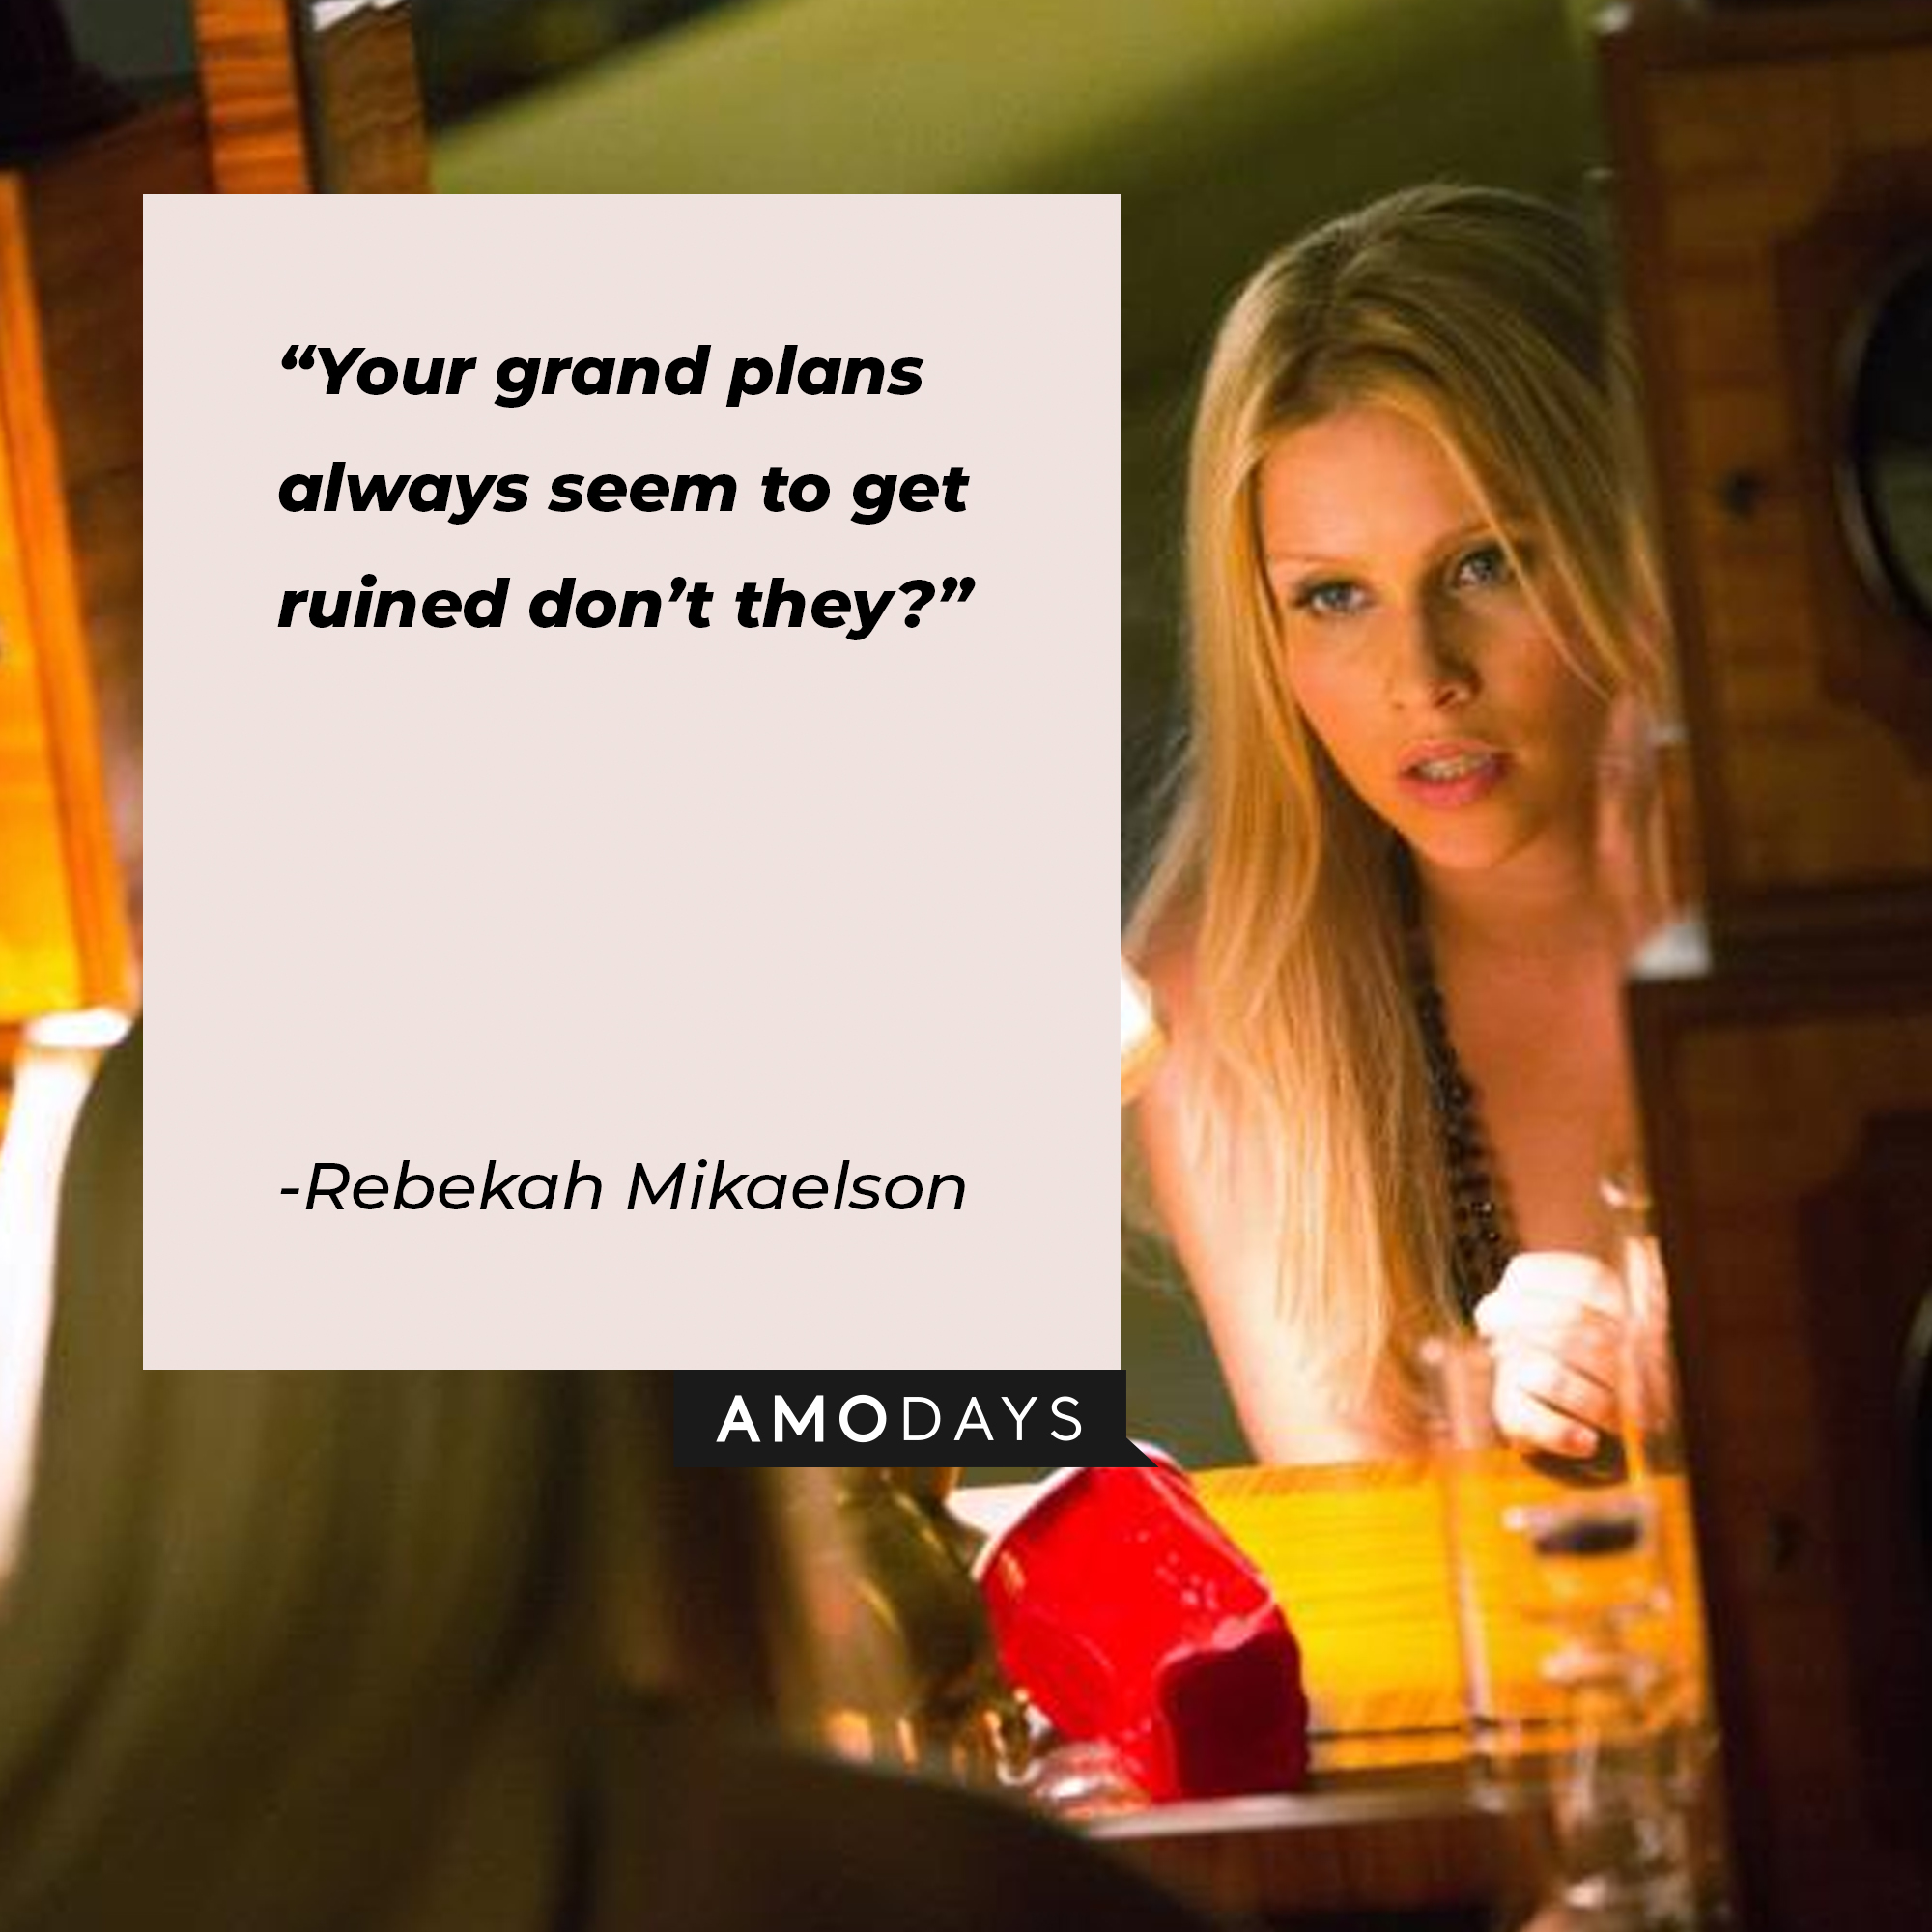 An image of Rebekah Mikaelson with her quote “Your grand plans always seem to get ruined don’t they?” | Source: facebook.com/thevampirediaries